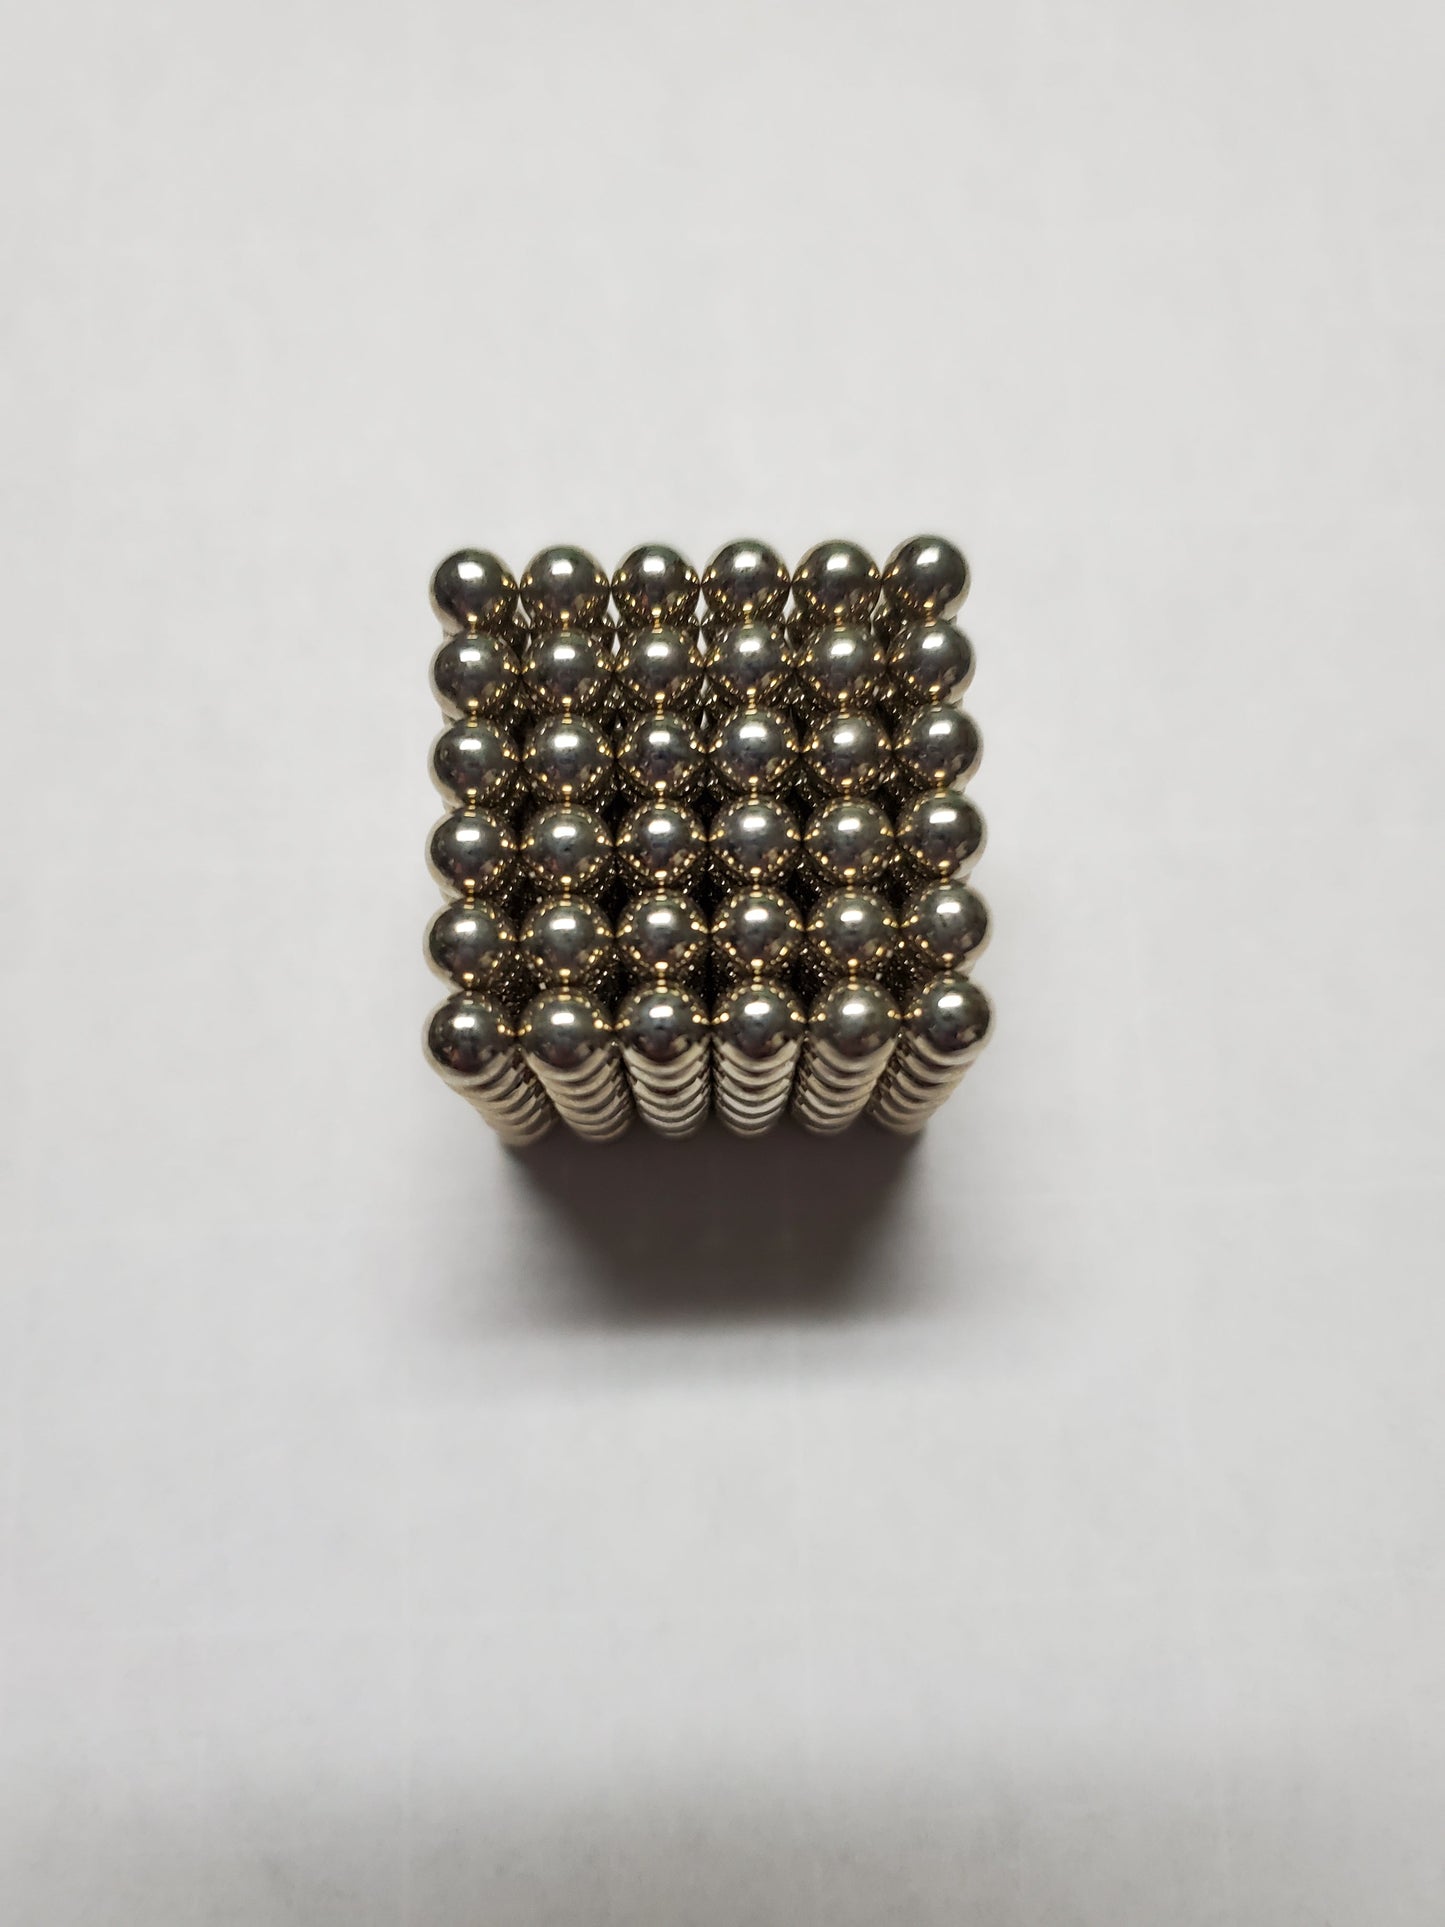 5mm (13/64") round spheres / balls 25 / 50 / 100 / 250 pcs STRONG MAGNETS - N35